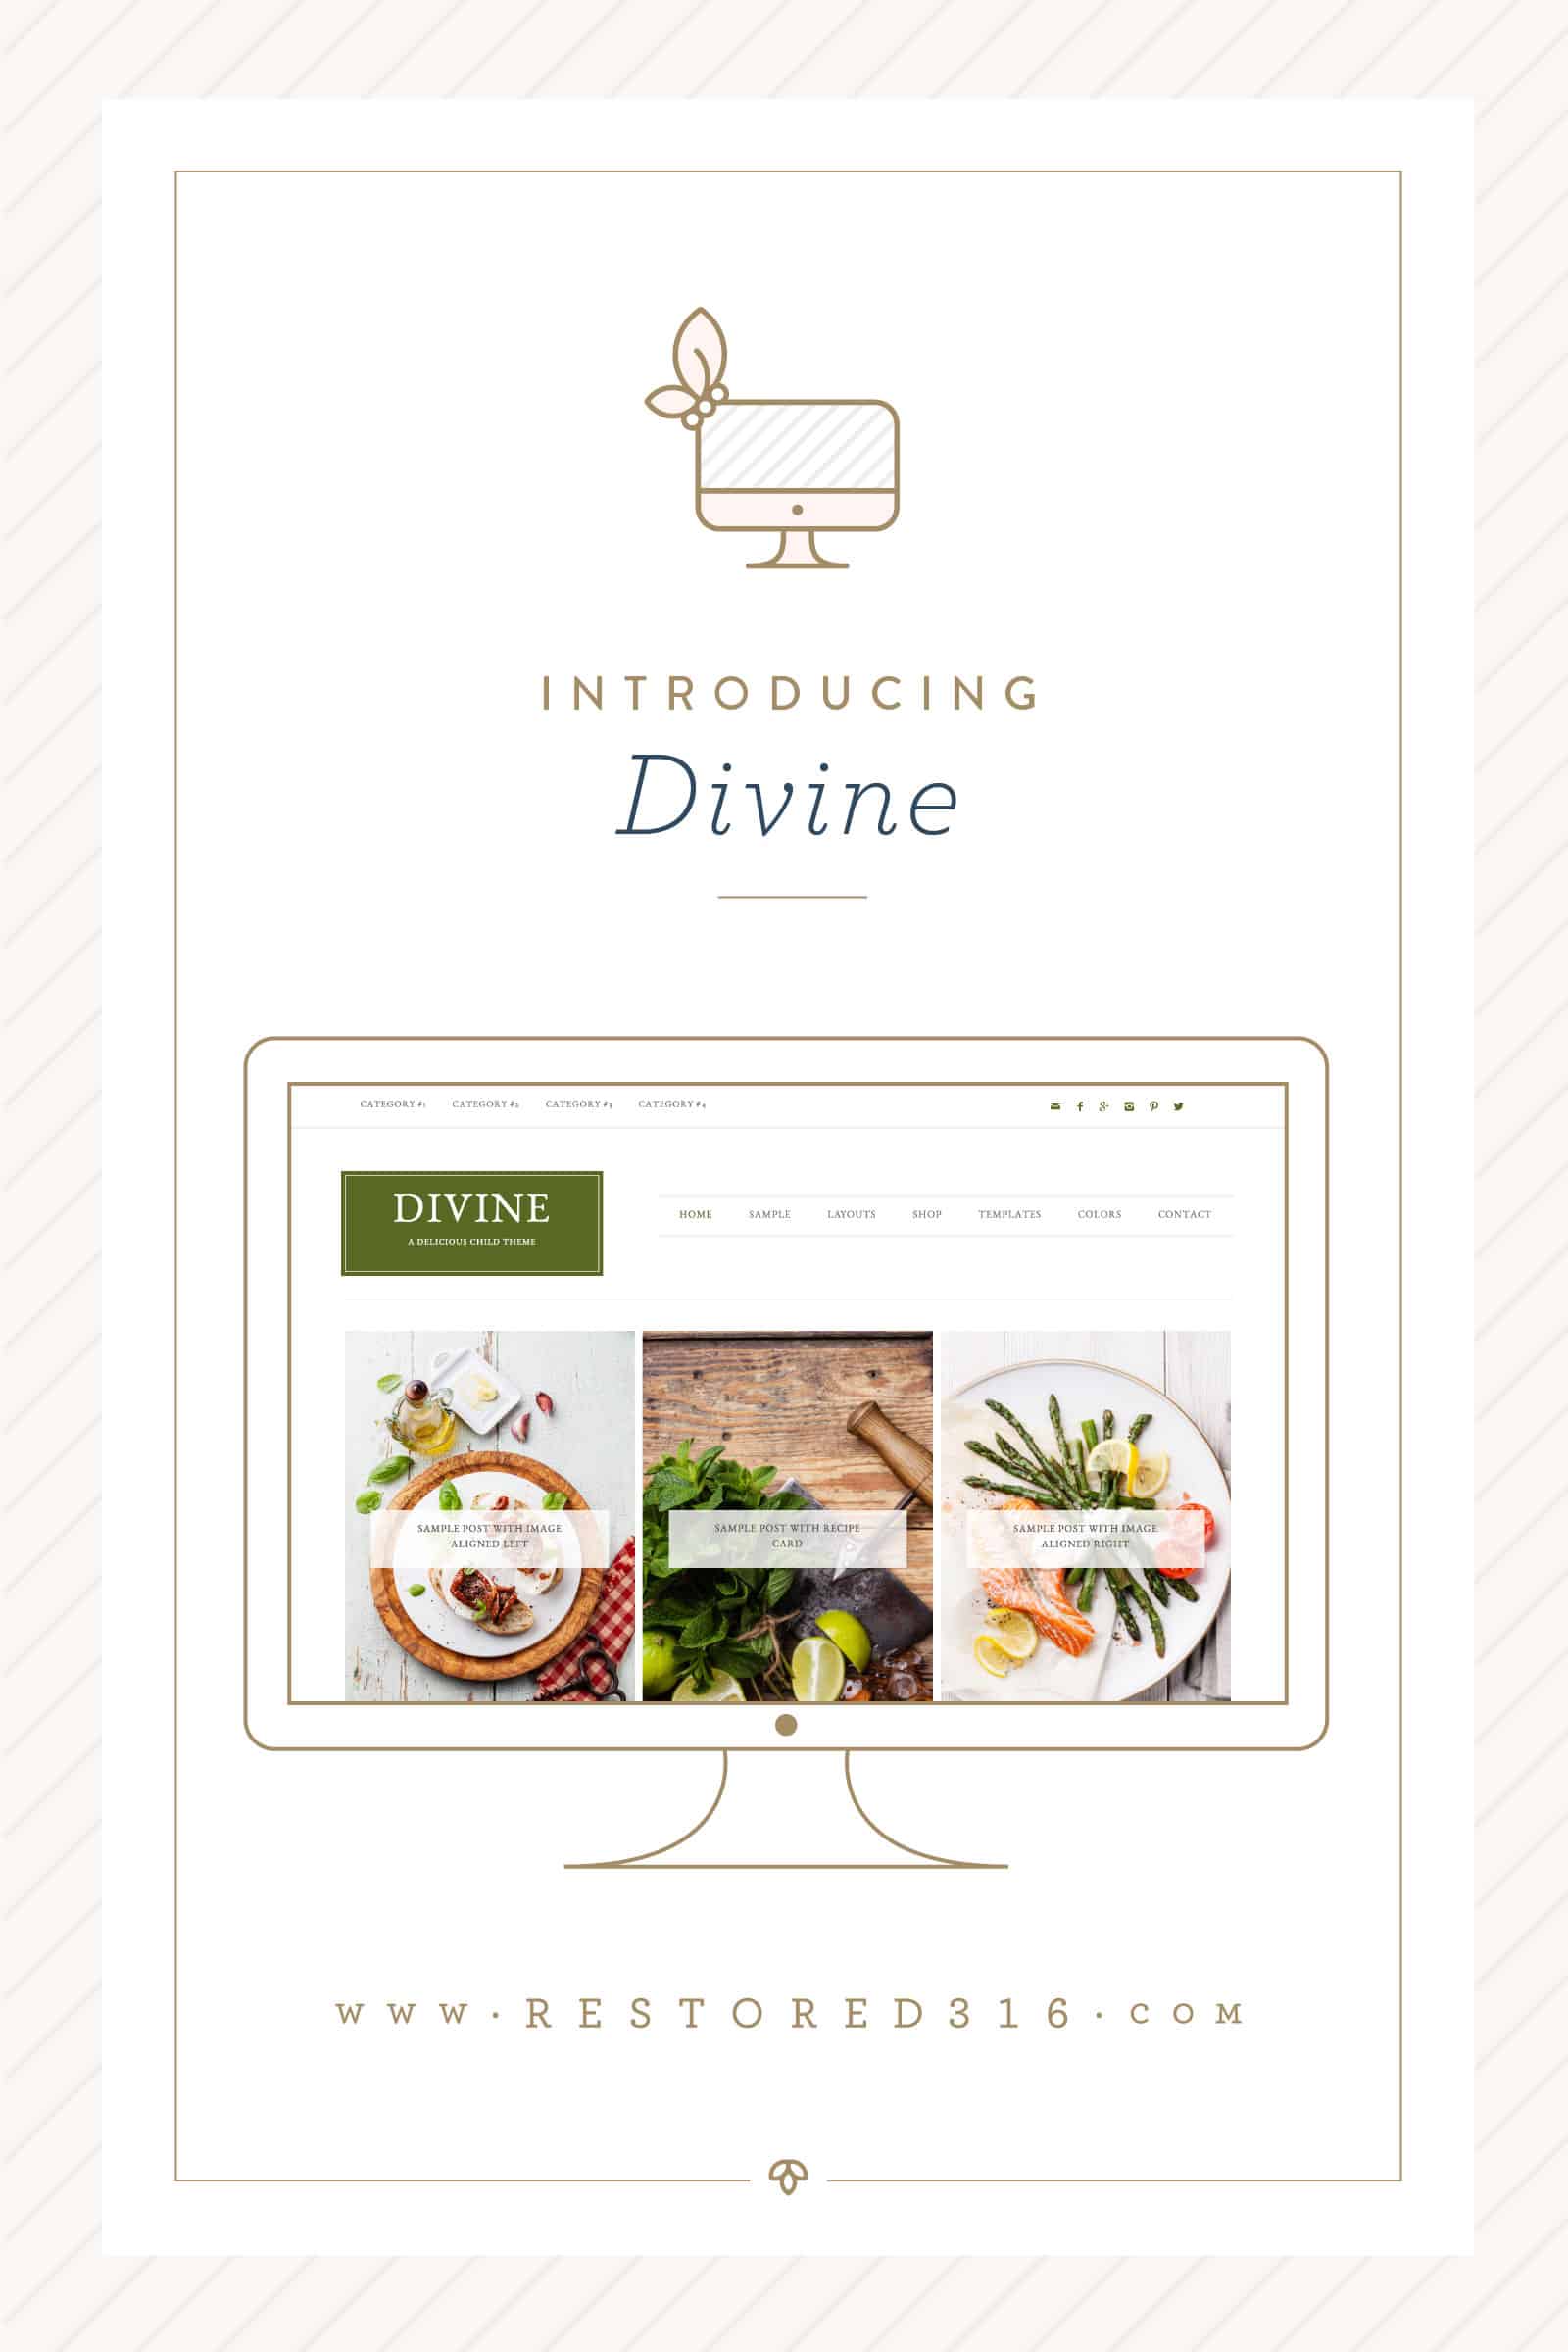 Introducing Divine: an Ecommerce Genesis Theme